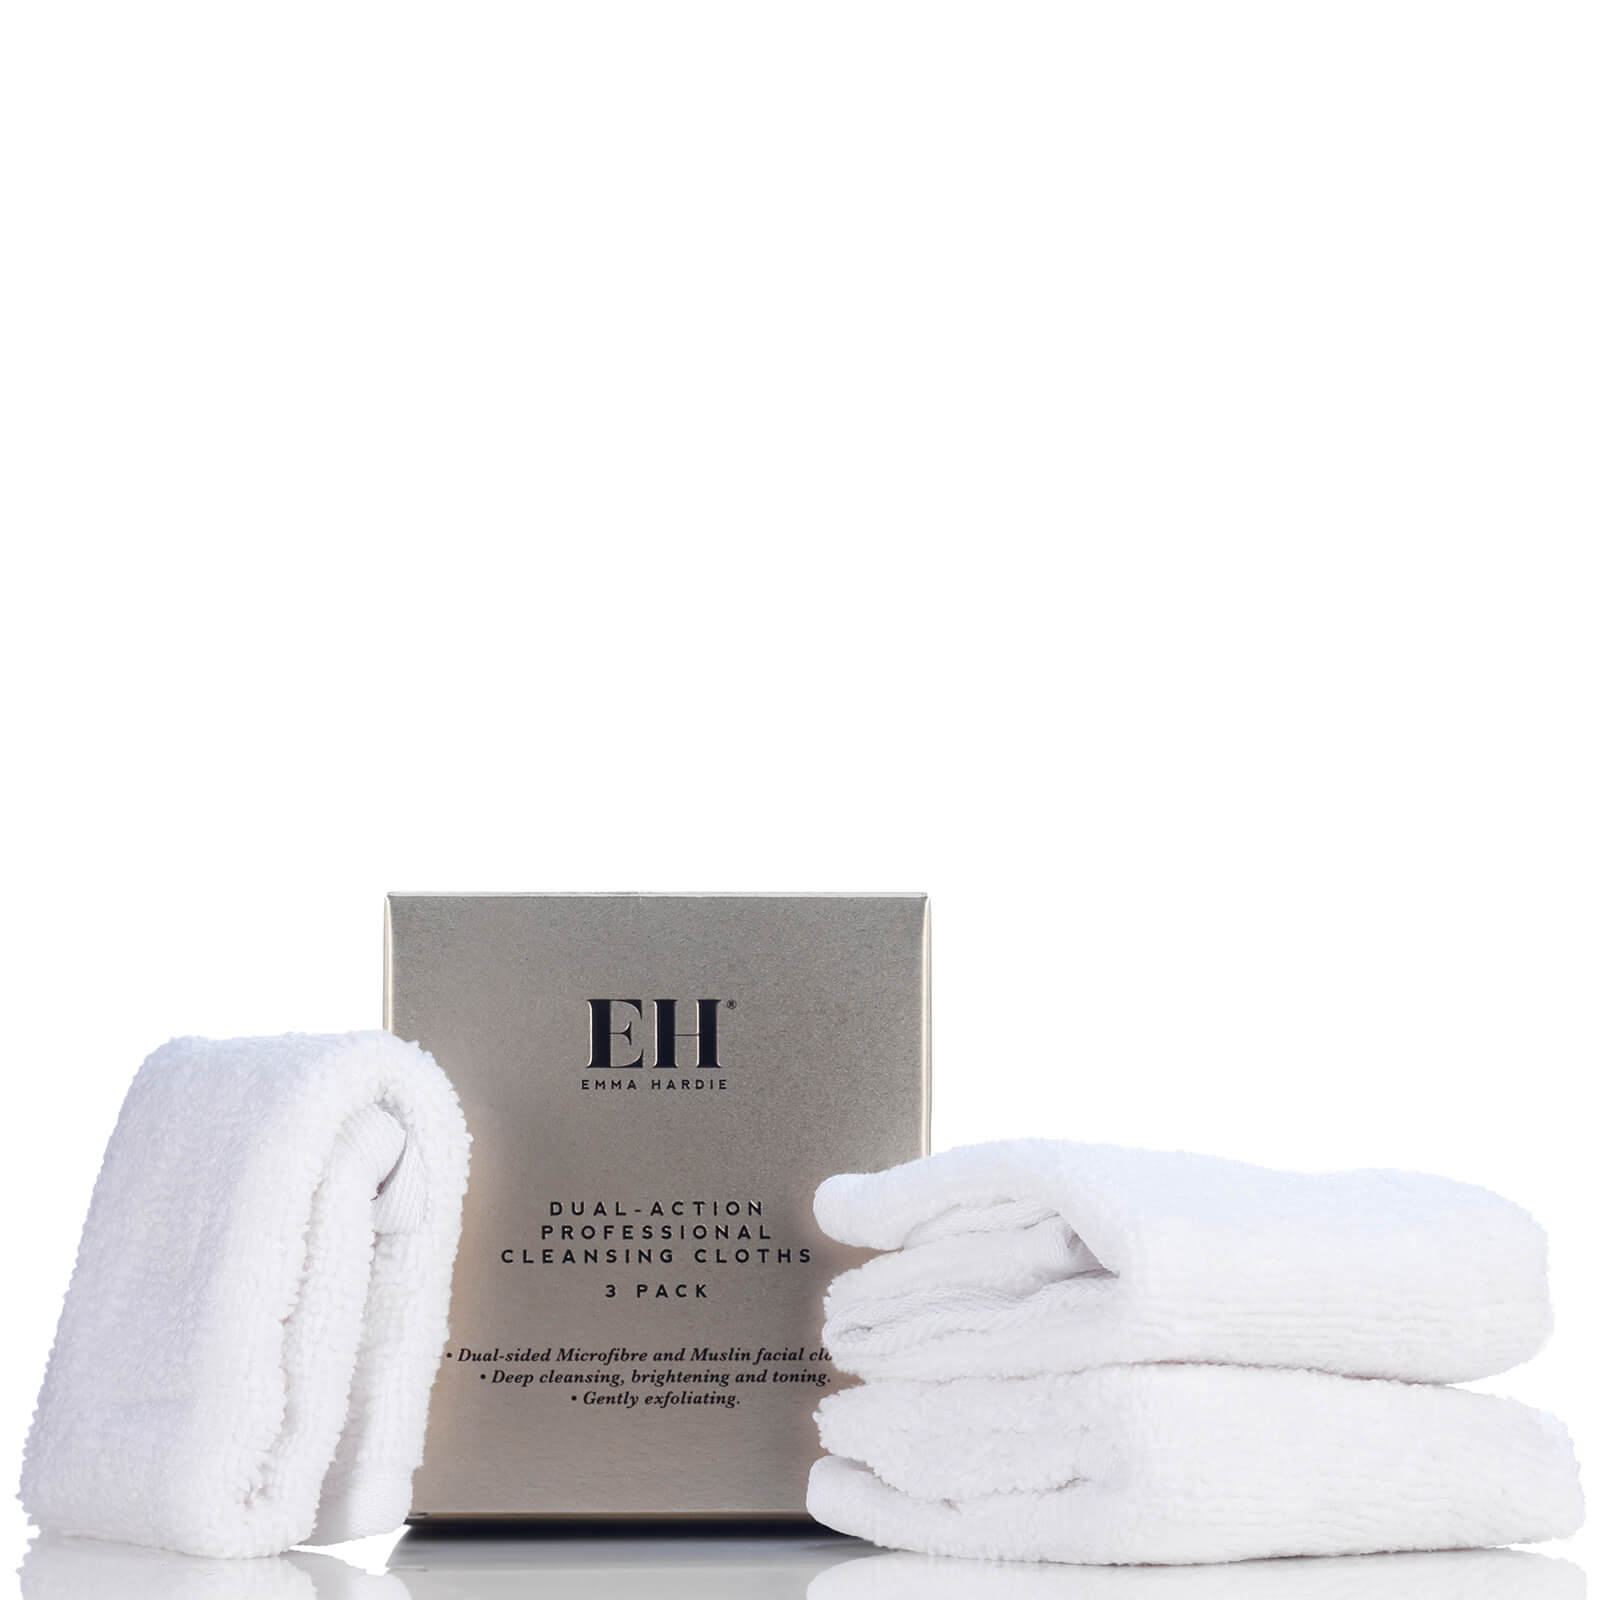 EMMA HARDIE PROFESSIONAL CLEANSING CLOTHS (3 PACK),EH3DACLTH